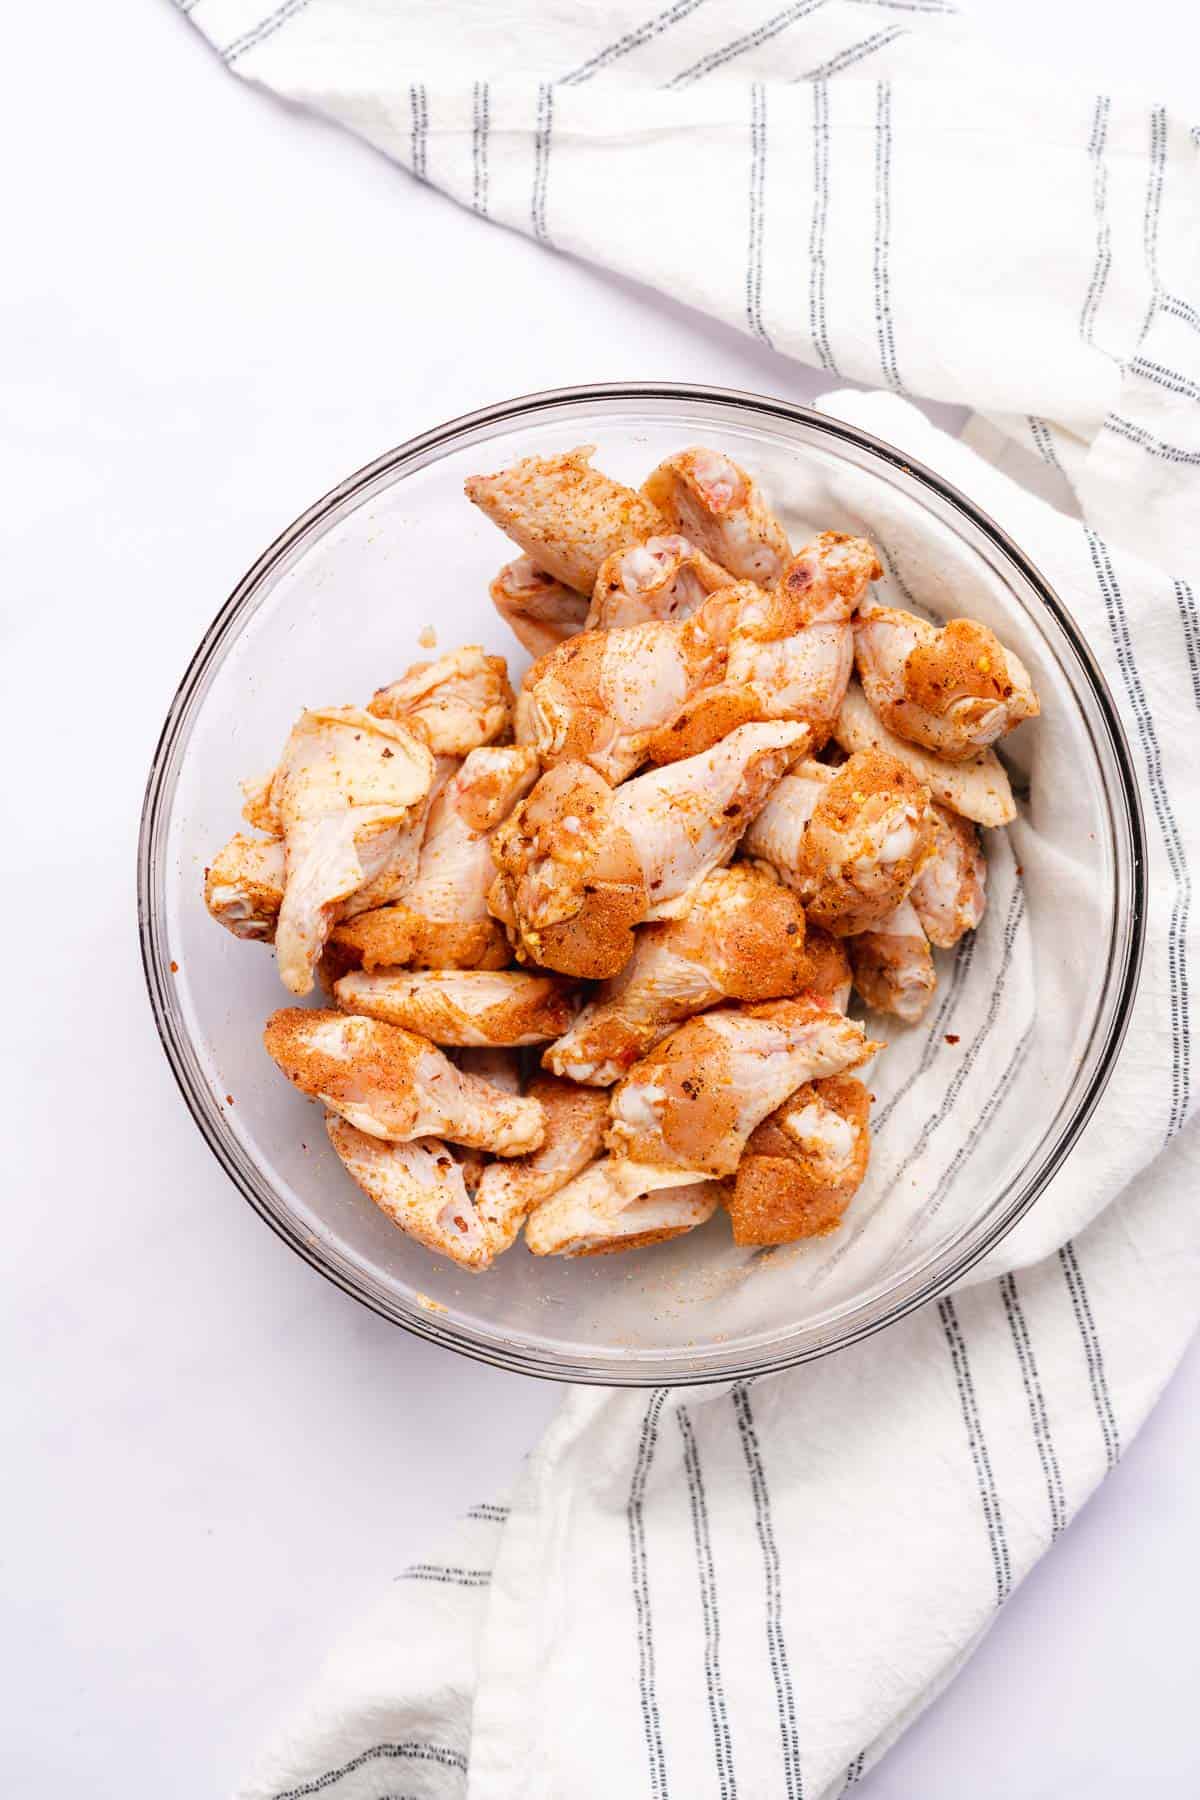 raw chicken wings ina. bowl with seasonings